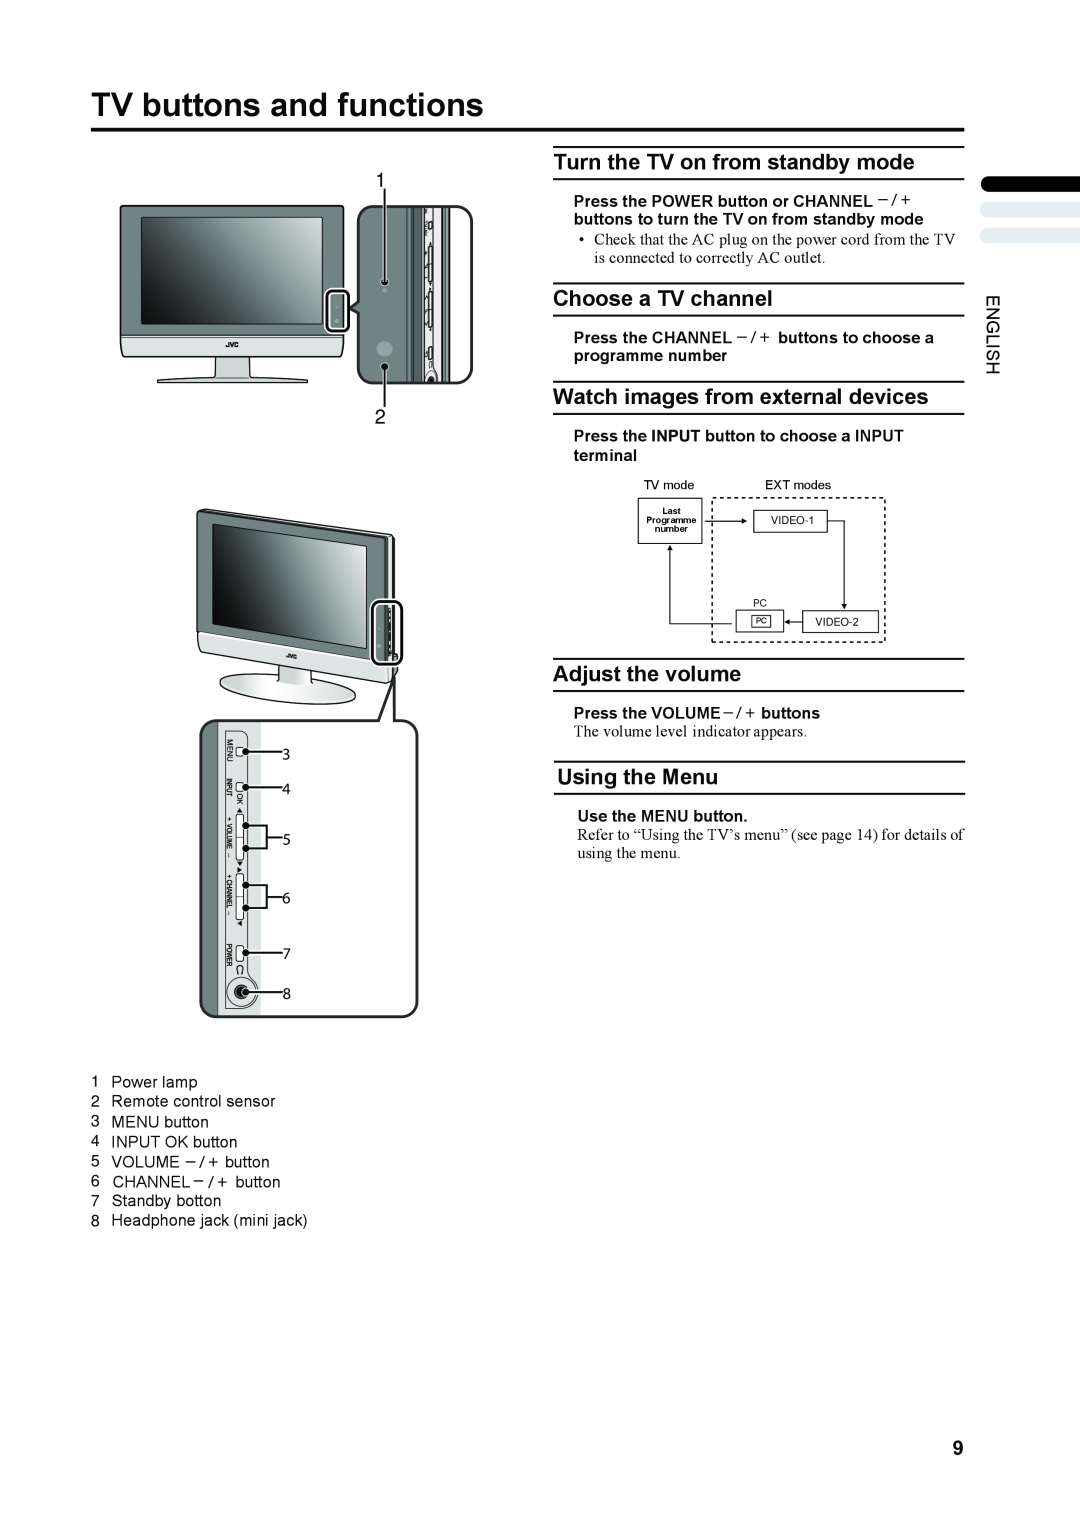 JVC LT-17X475 manual TV buttons and functions, Turn the TV on from standby mode, Choose a TV channel, Adjust the volume 